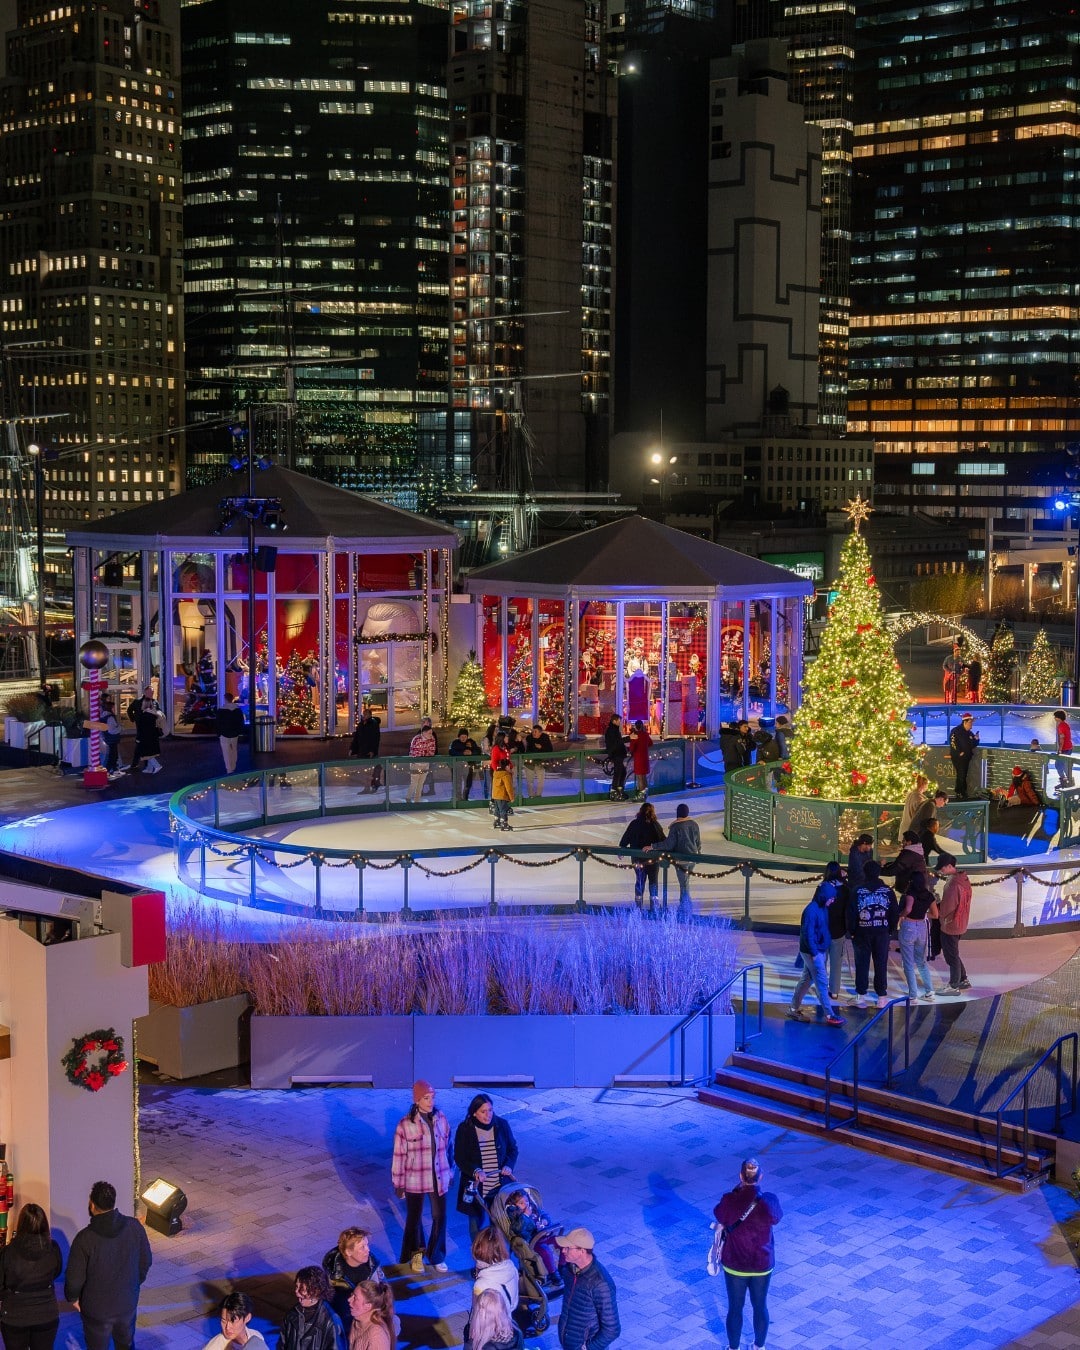 Rooftop skating. Hot chocolate. Skyline views. Meet & greets with Santa. The coziest holiday destination in NYC. Get into the holiday spirit and explore it all at @santaclauseswonderland ⛸️ Santa on site ↴ December 8-10, 15-17, 22-24 Tickets ➤ link in bio #TheSeaport